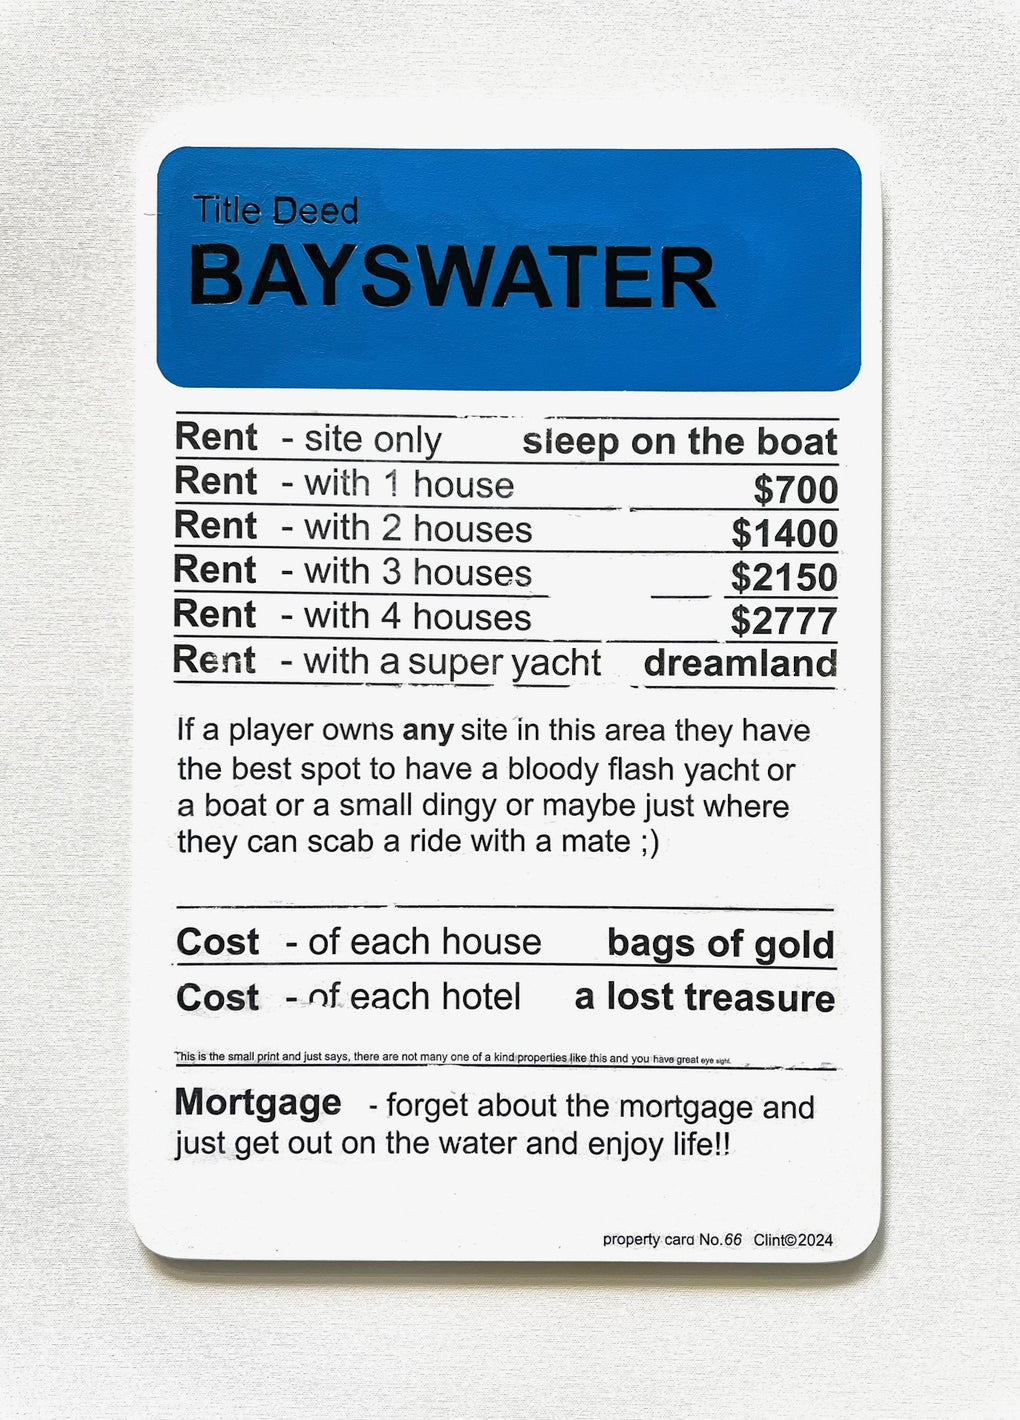 Title Deed Bayswater